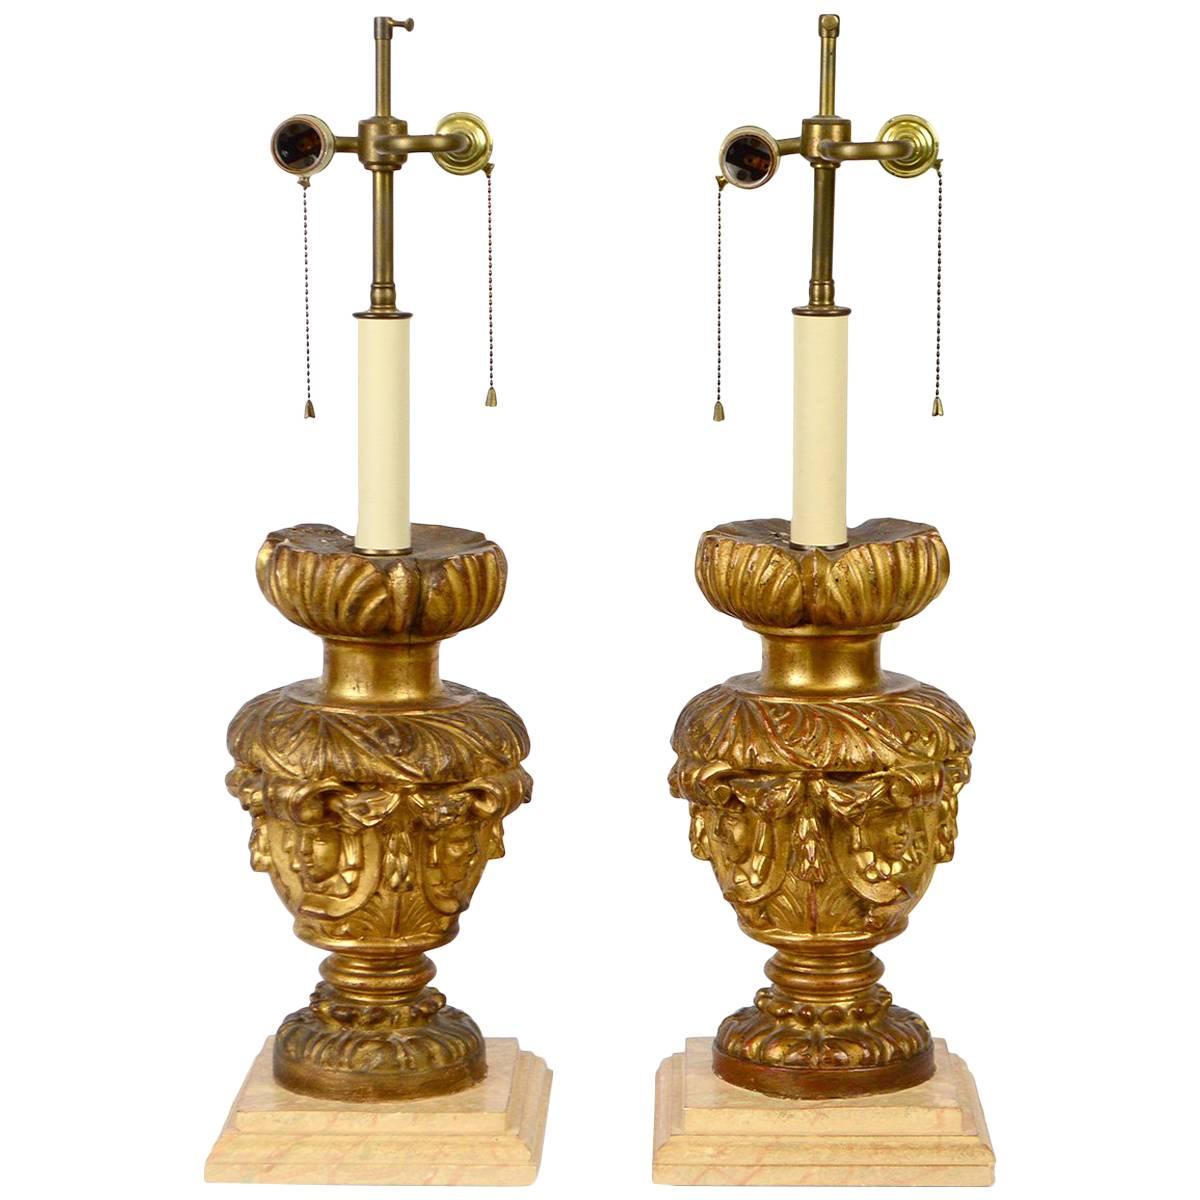 Pair of 18th-19th Century Carved Italian Giltwood Lamps